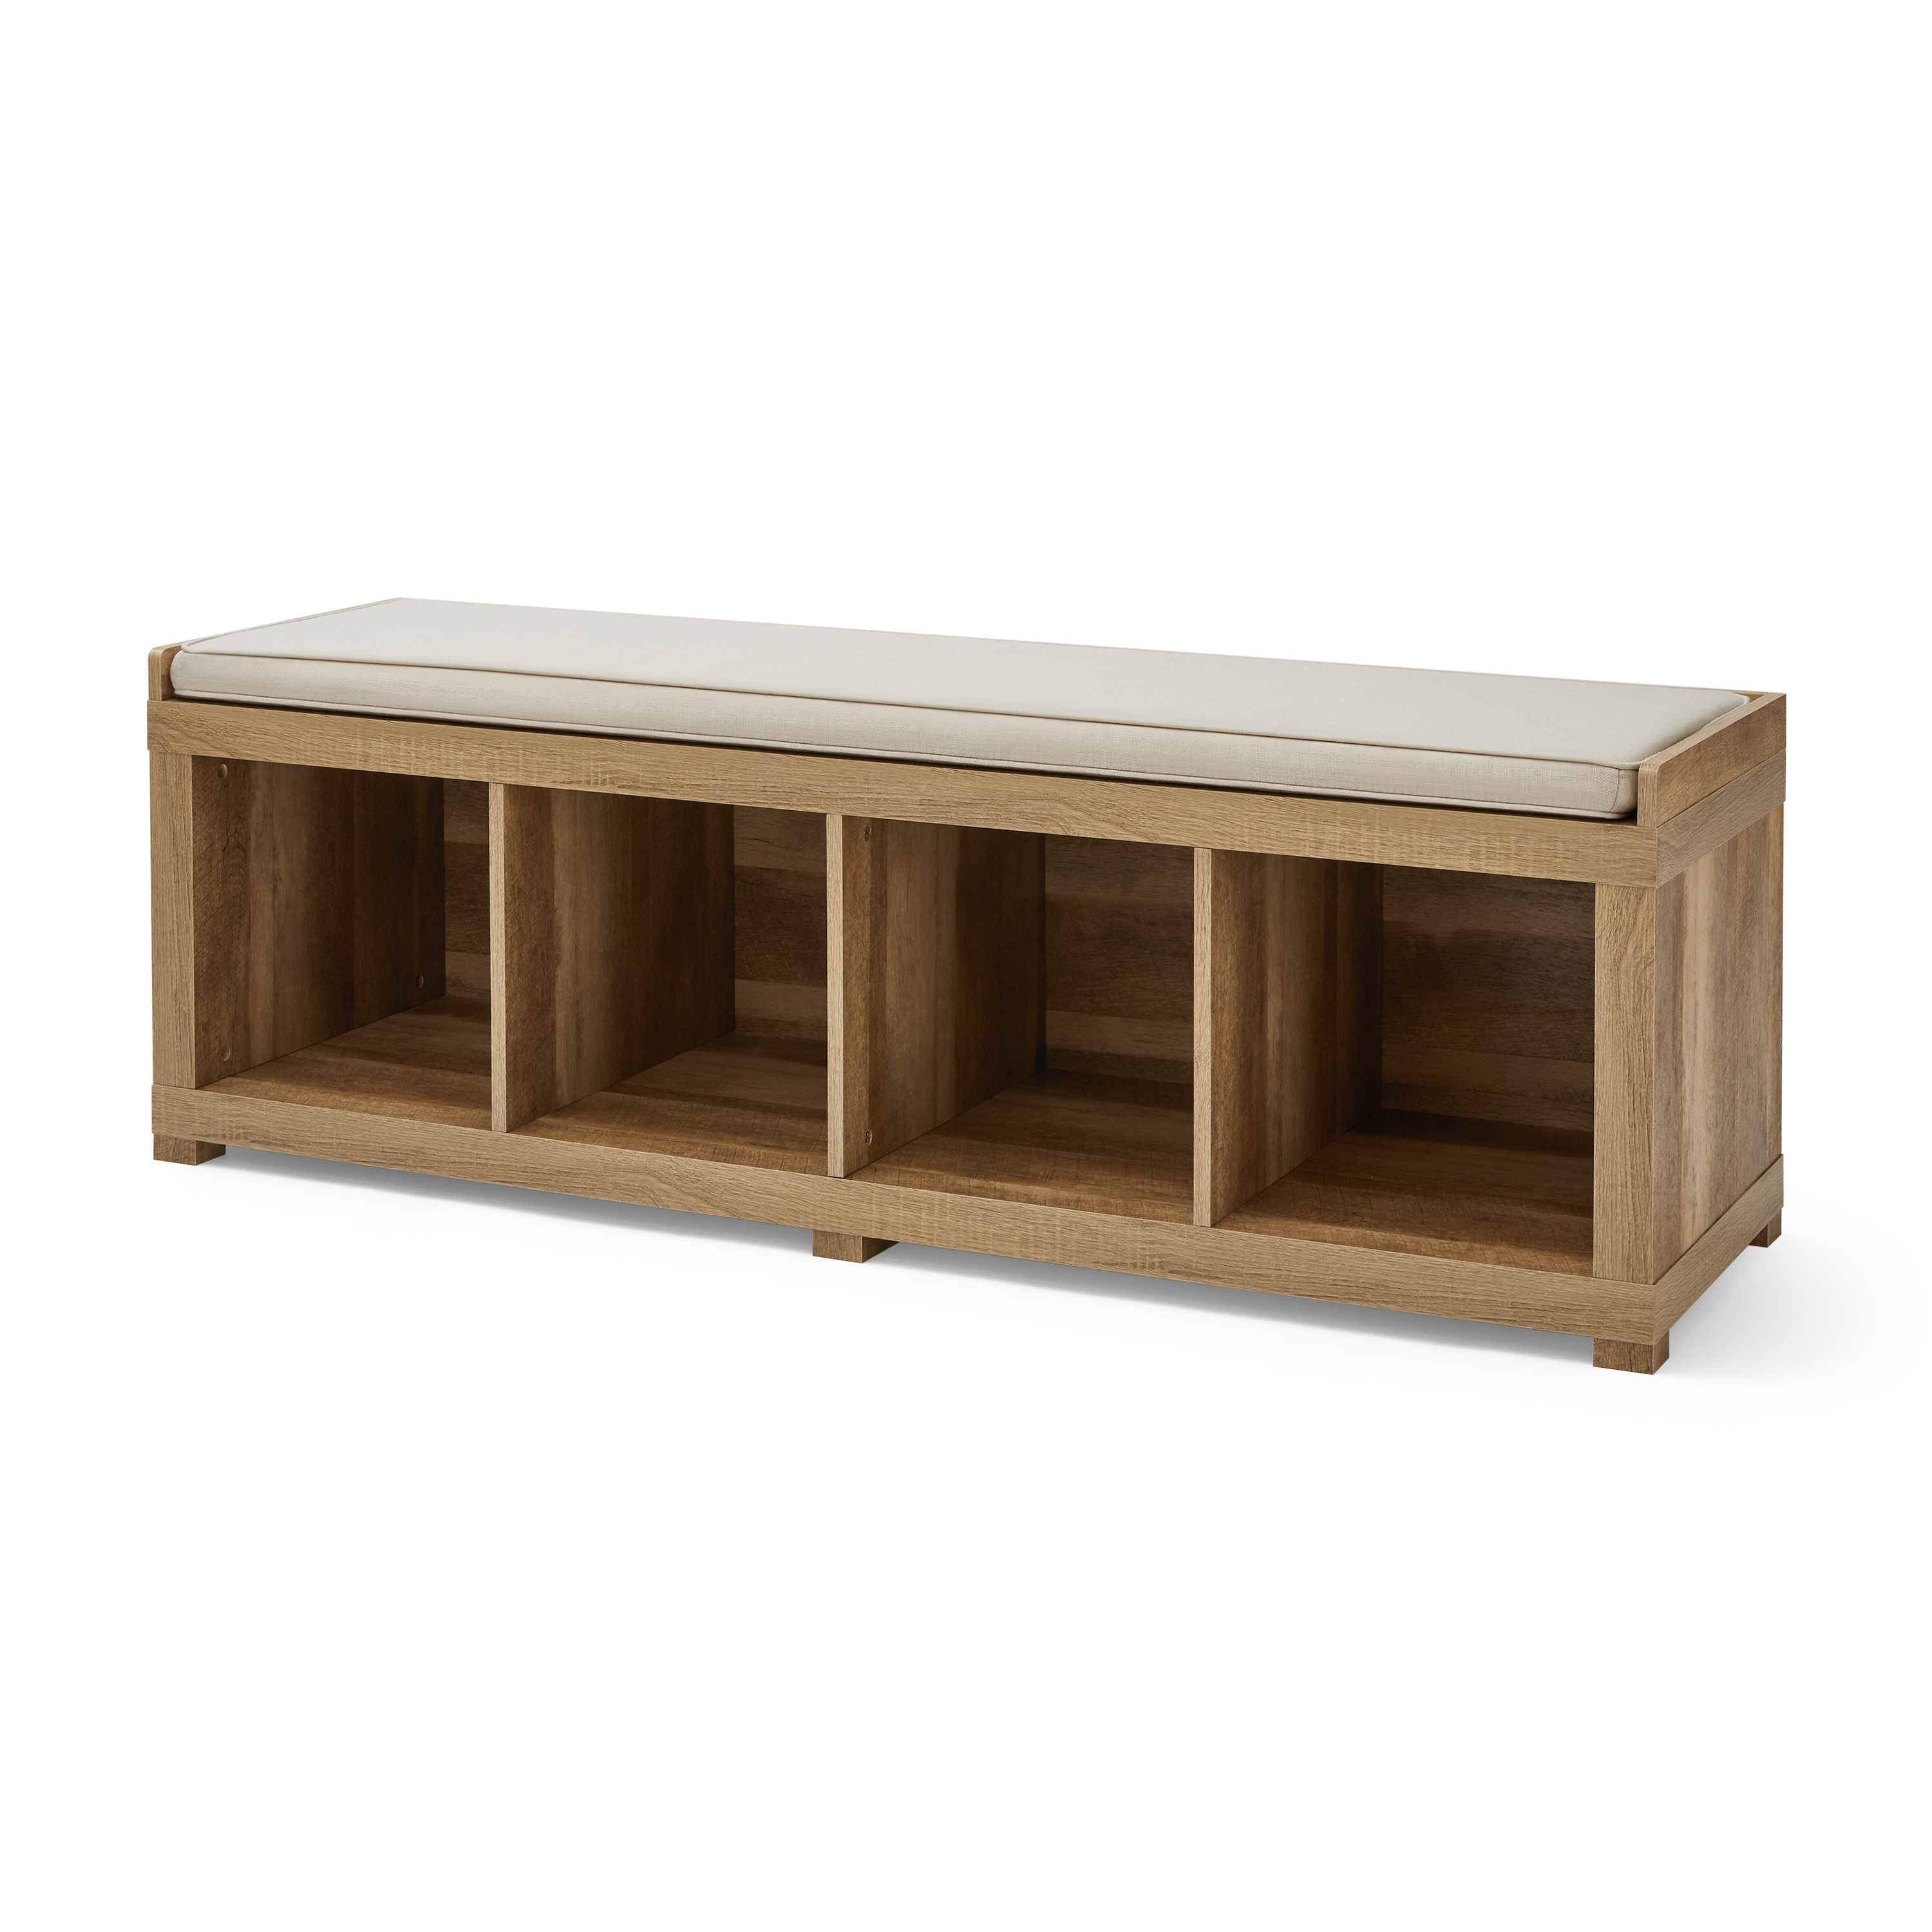 Better Homes & Gardens 4-Cube Shoe Storage Bench, Weathered - image 3 of 7